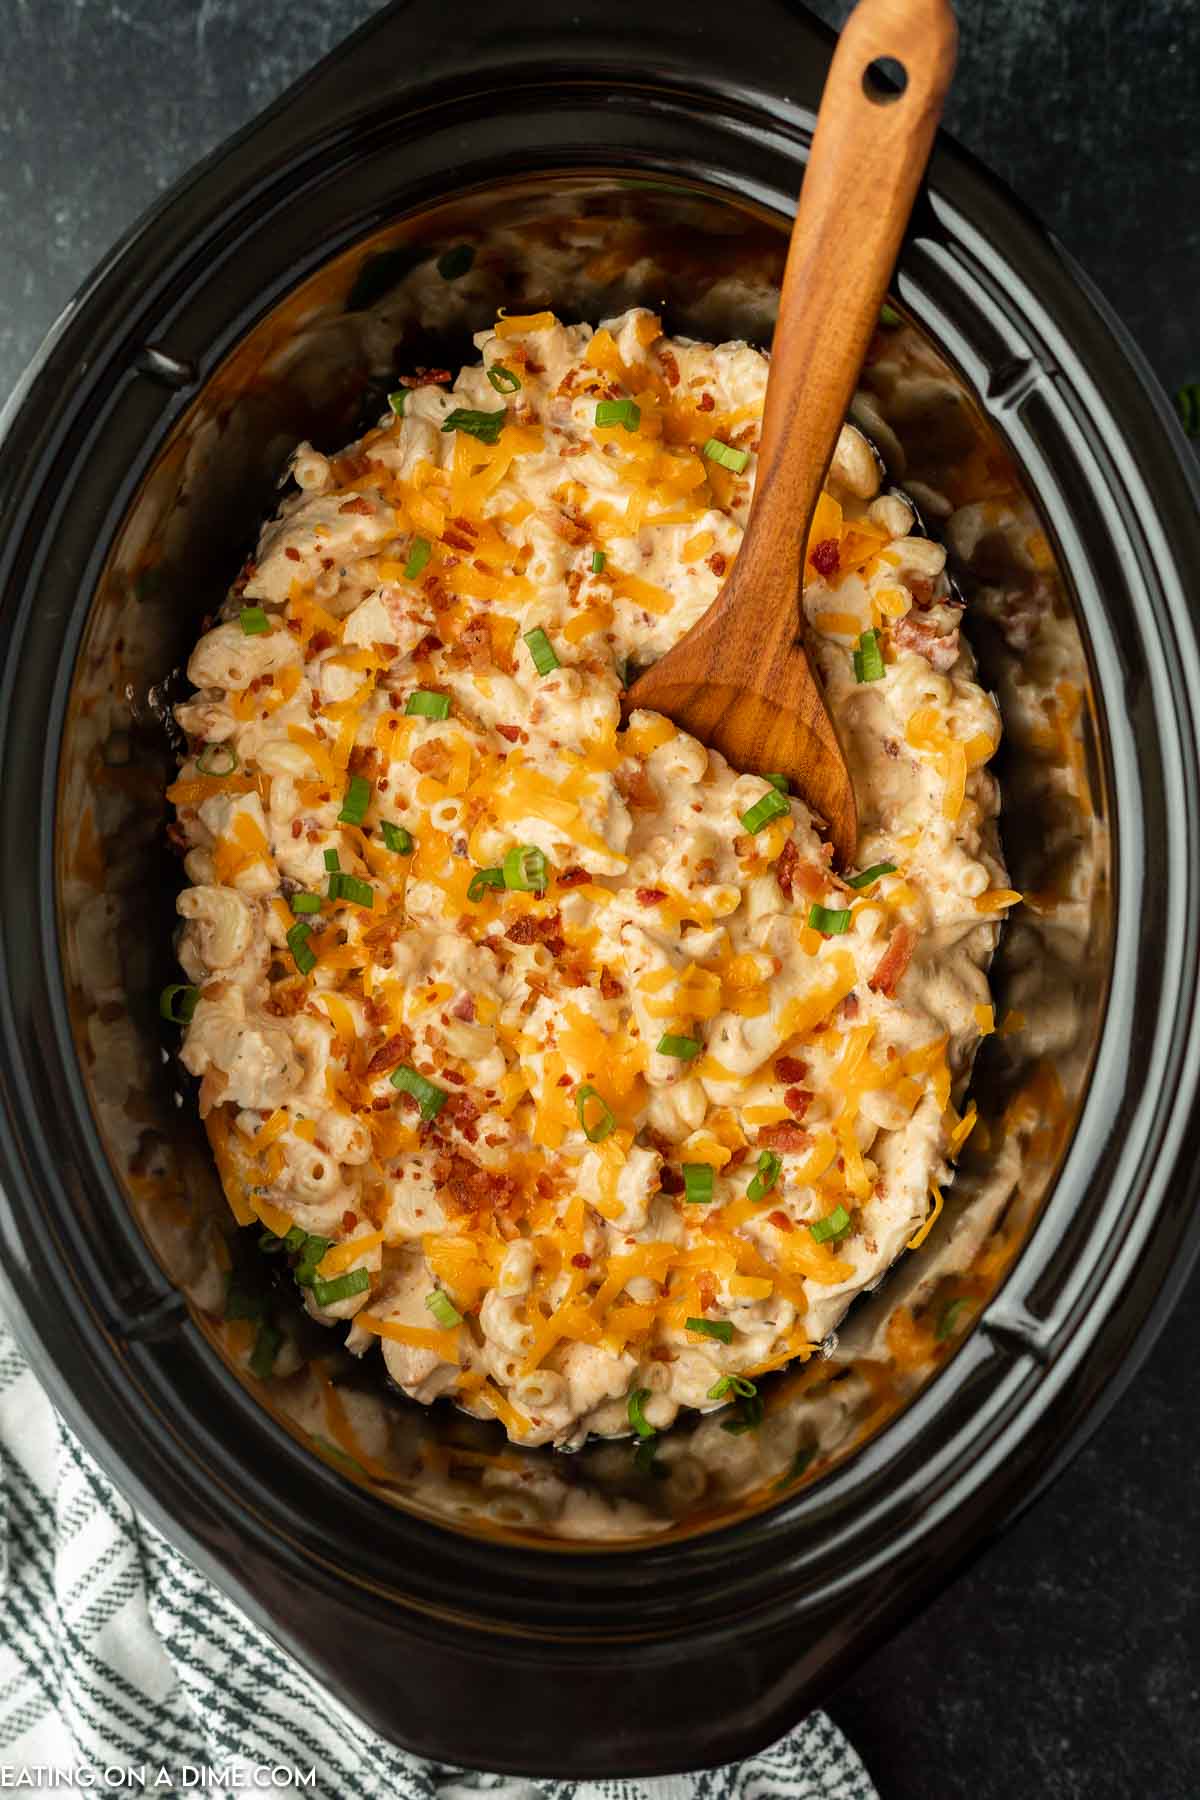 Crack chicken casserole in a crock pot with a wooden spoon